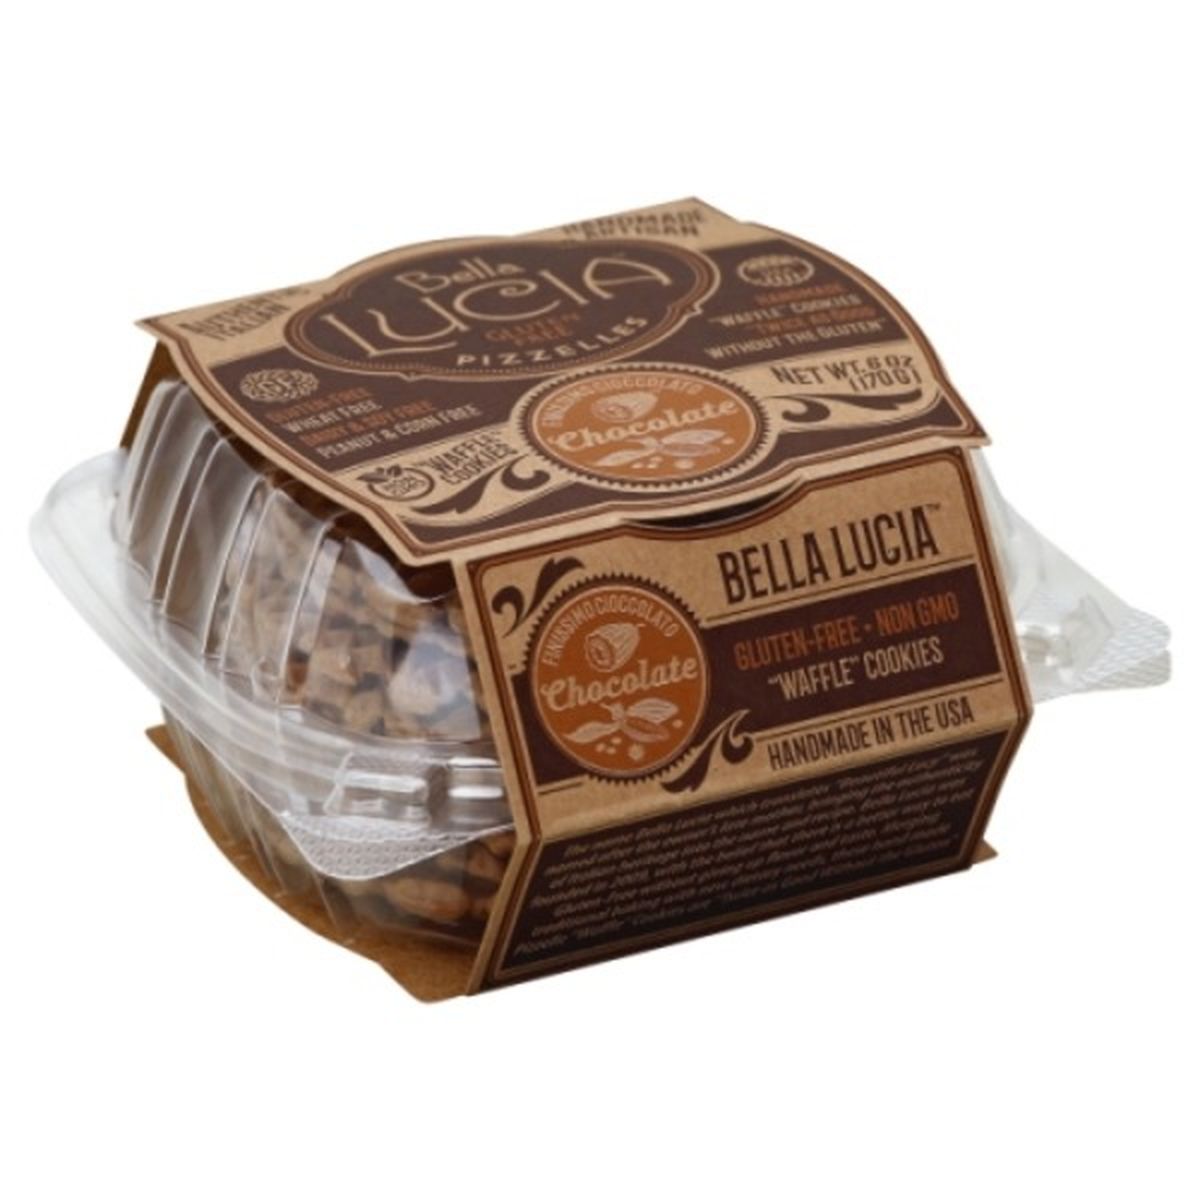 Calories in Bella Lucia Pizzelles, Gluten Free, Chocolate